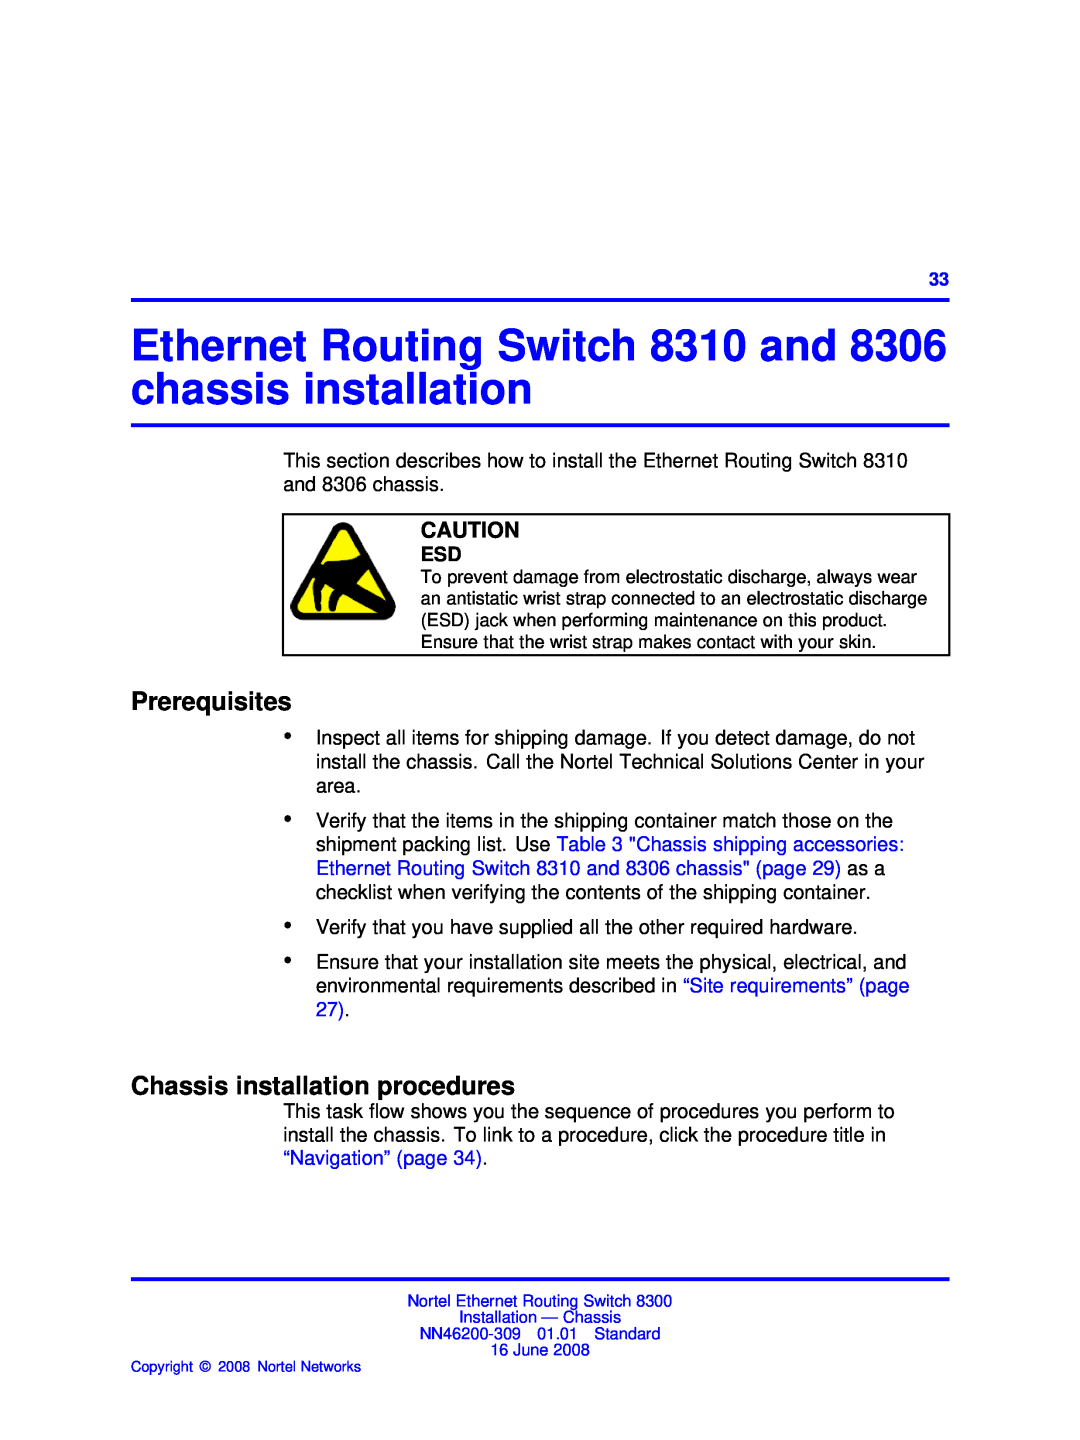 Nortel Networks manual Ethernet Routing Switch 8310 and 8306 chassis installation, Chassis installation procedures 